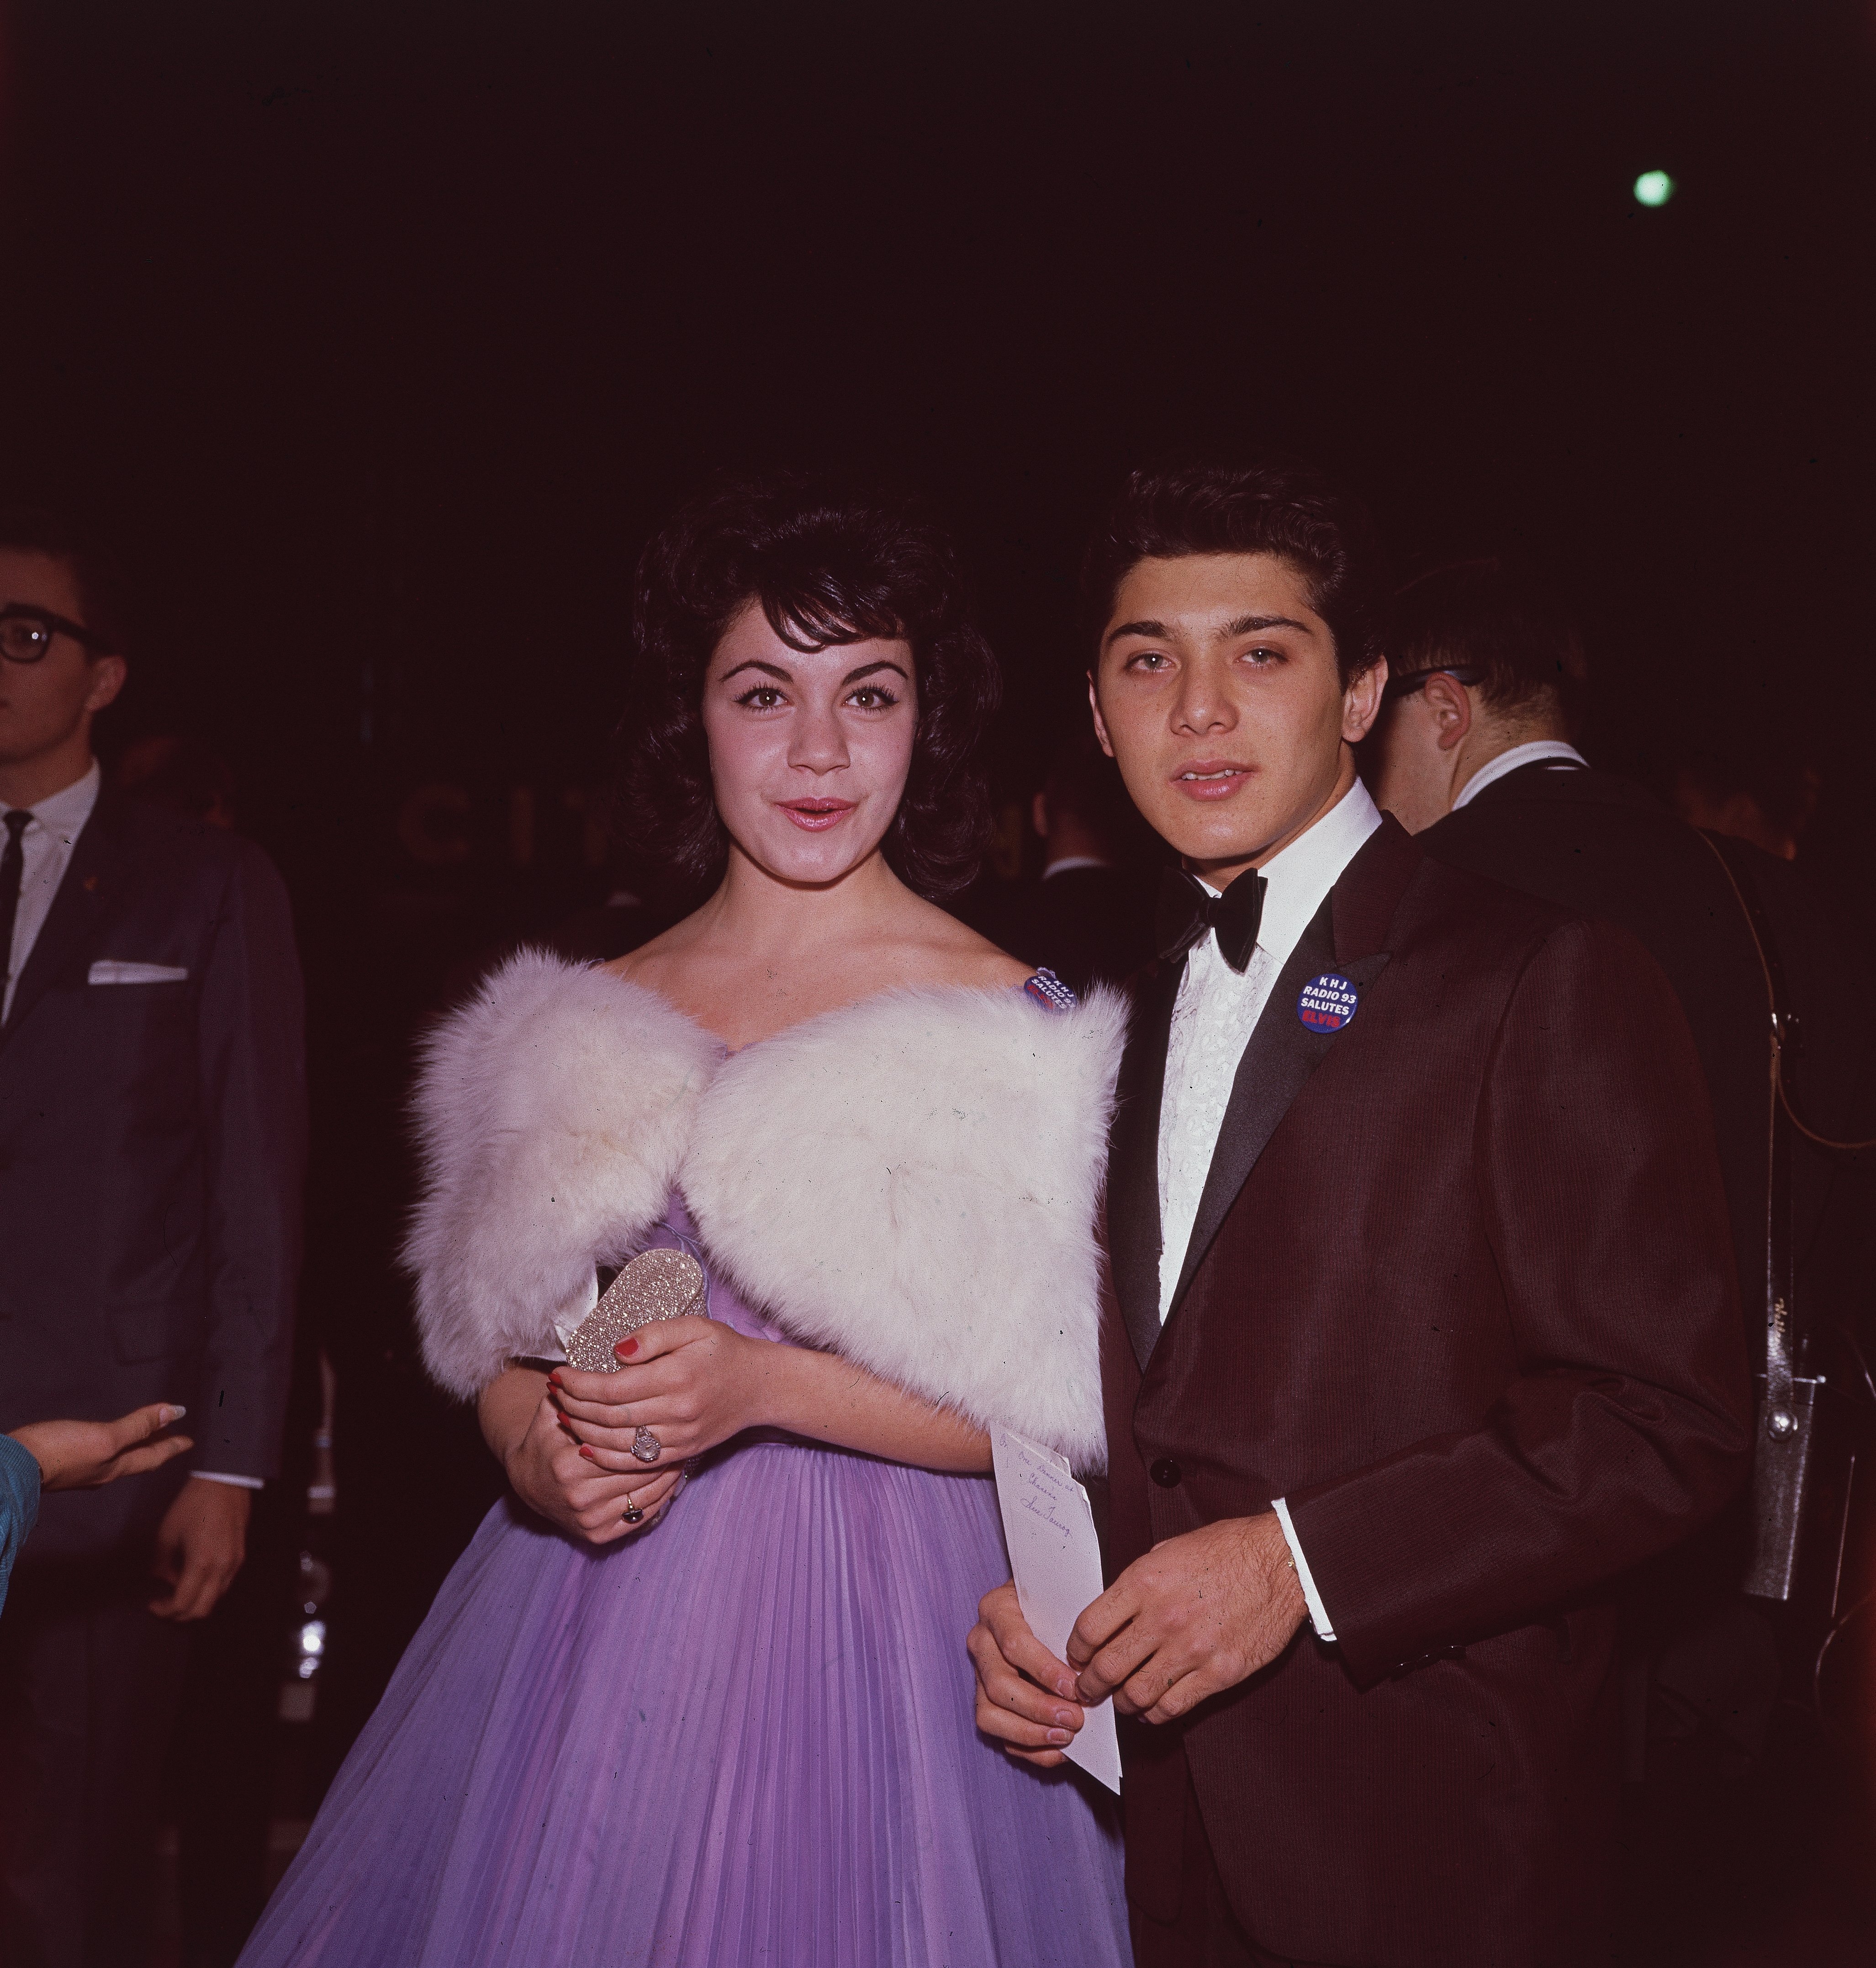  American actors Annette Funicello and Paul Anka. Both wear buttons which read, 'KHJ Radio 93 Salutes Elvis.' Circa 1962 | Source: Getty Images 